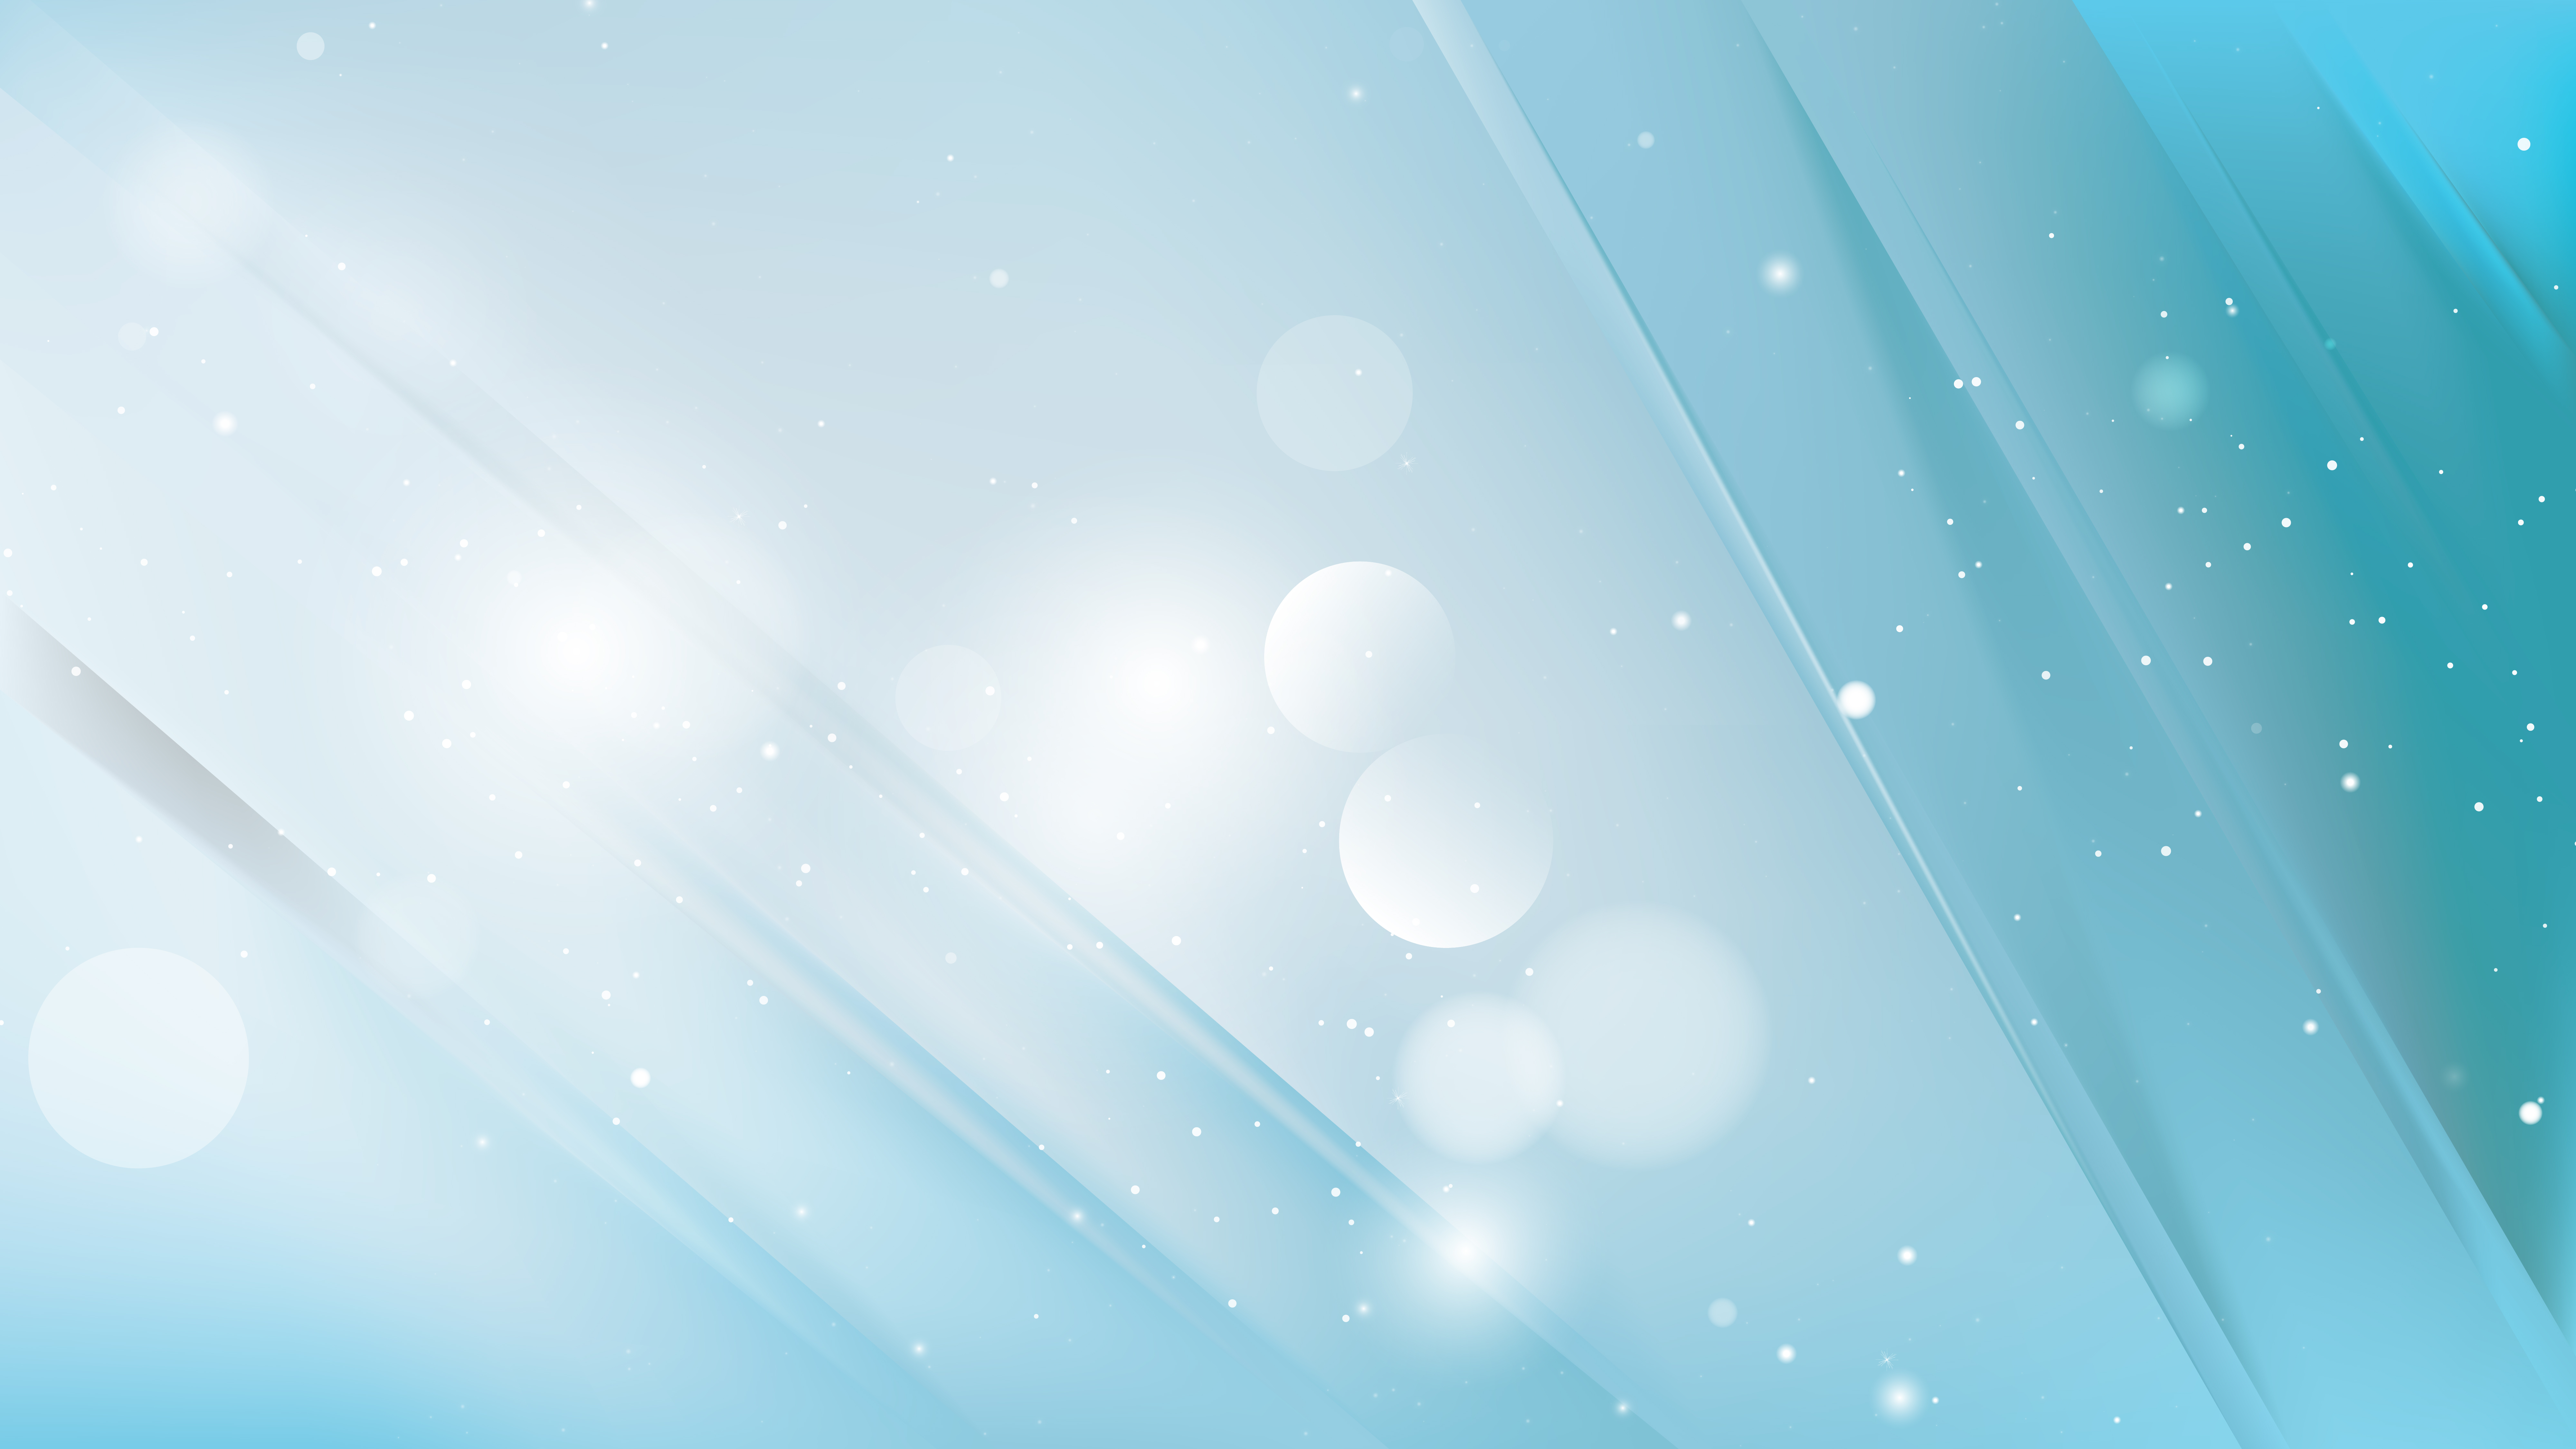 Abstract Light Blue Background Graphic Design